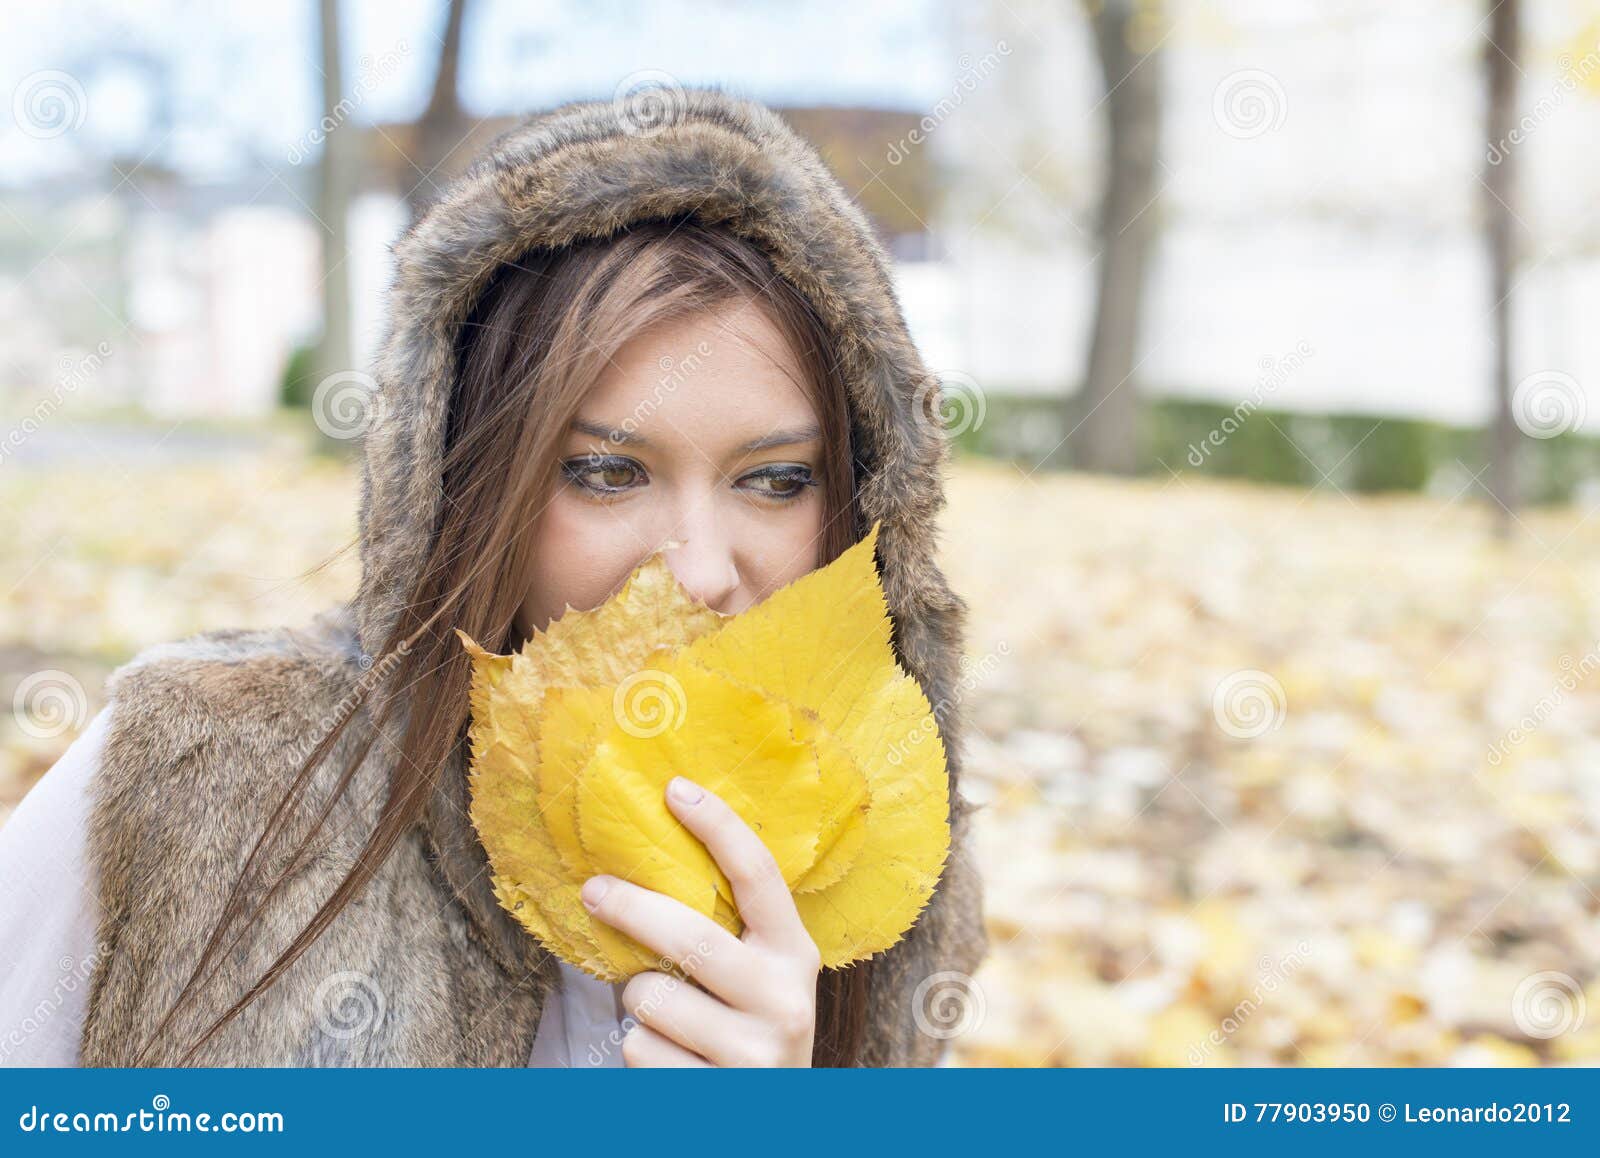 Young Woman Covering Face with Autumn Leaves. Stock Photo - Image of ...